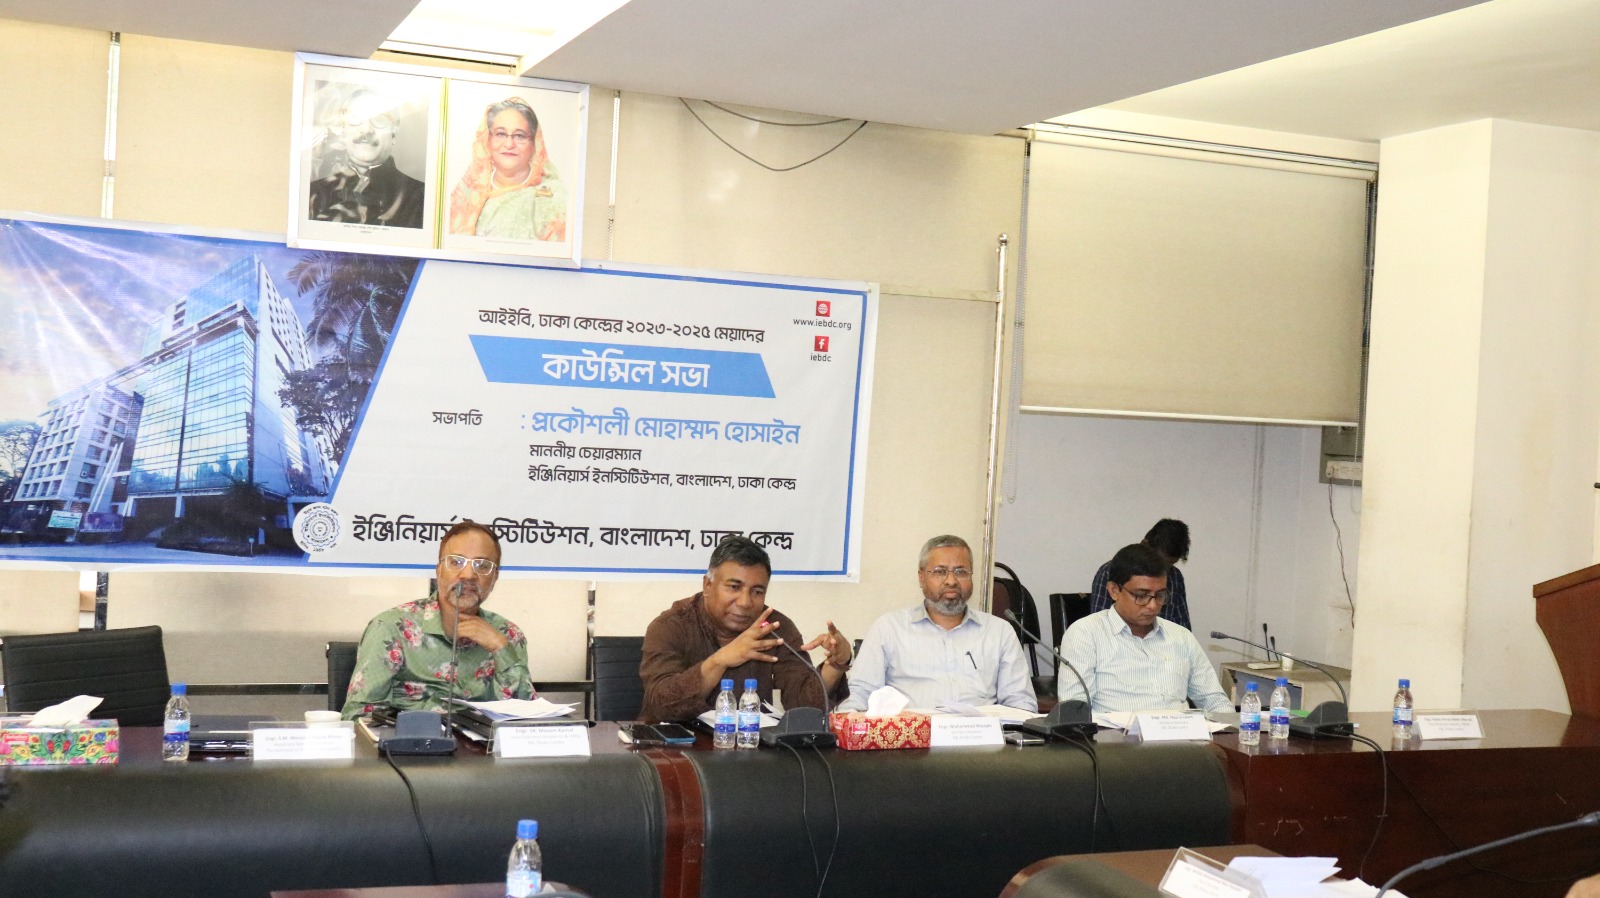 460th (1st of 2023-25) Council Meeting of IEB, Dhaka Centre